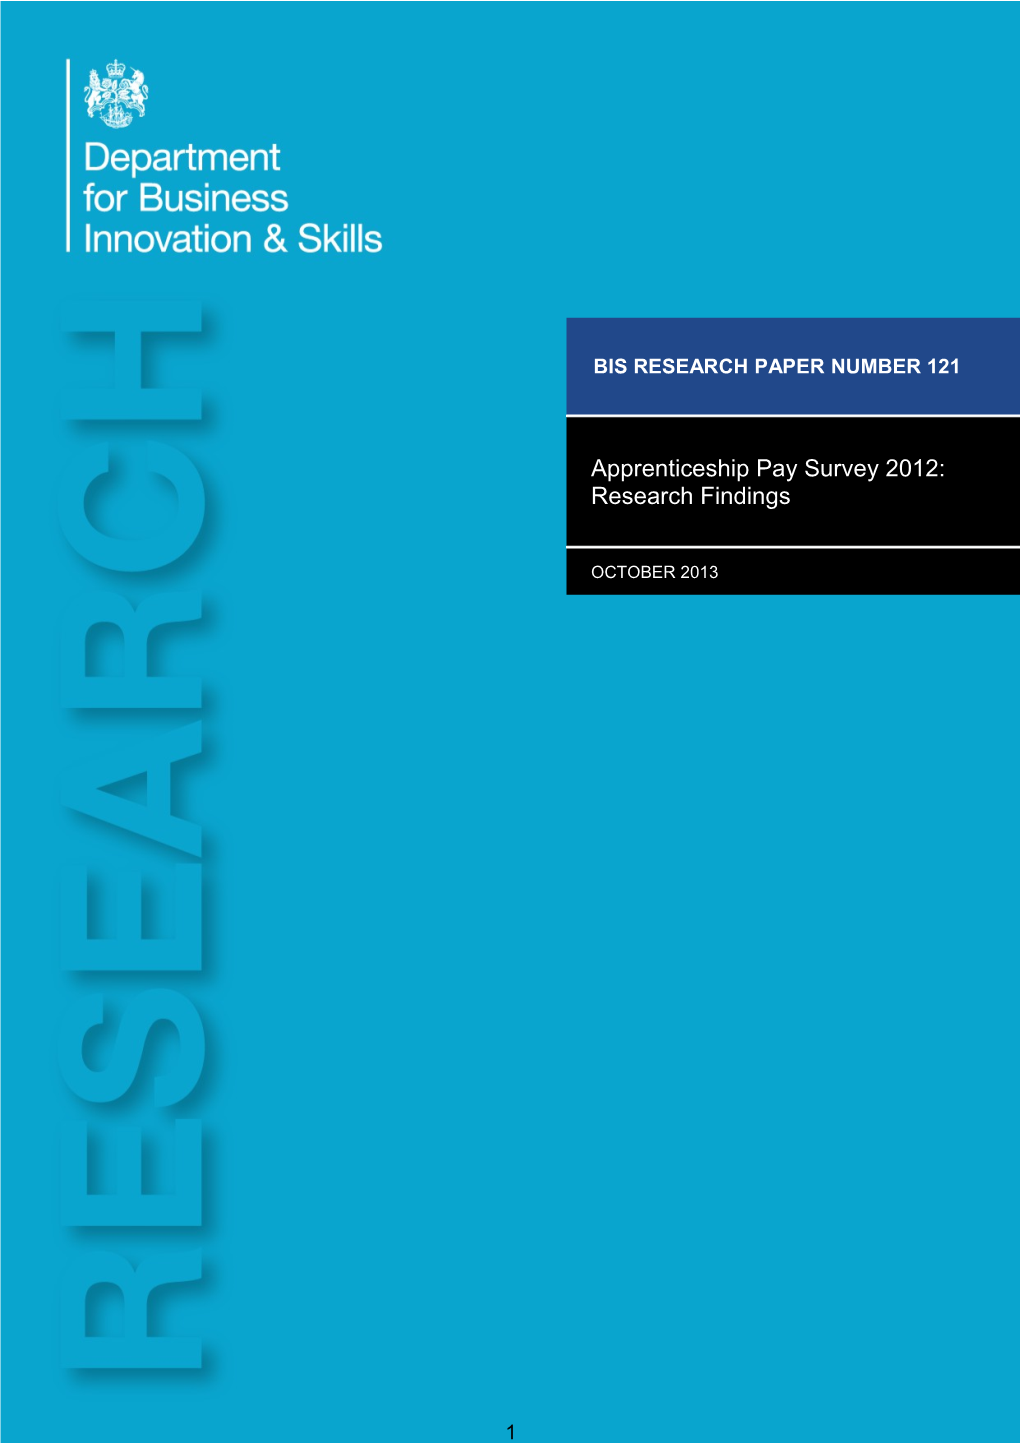 Apprenticeship Pay Survey 2012: Research Findings